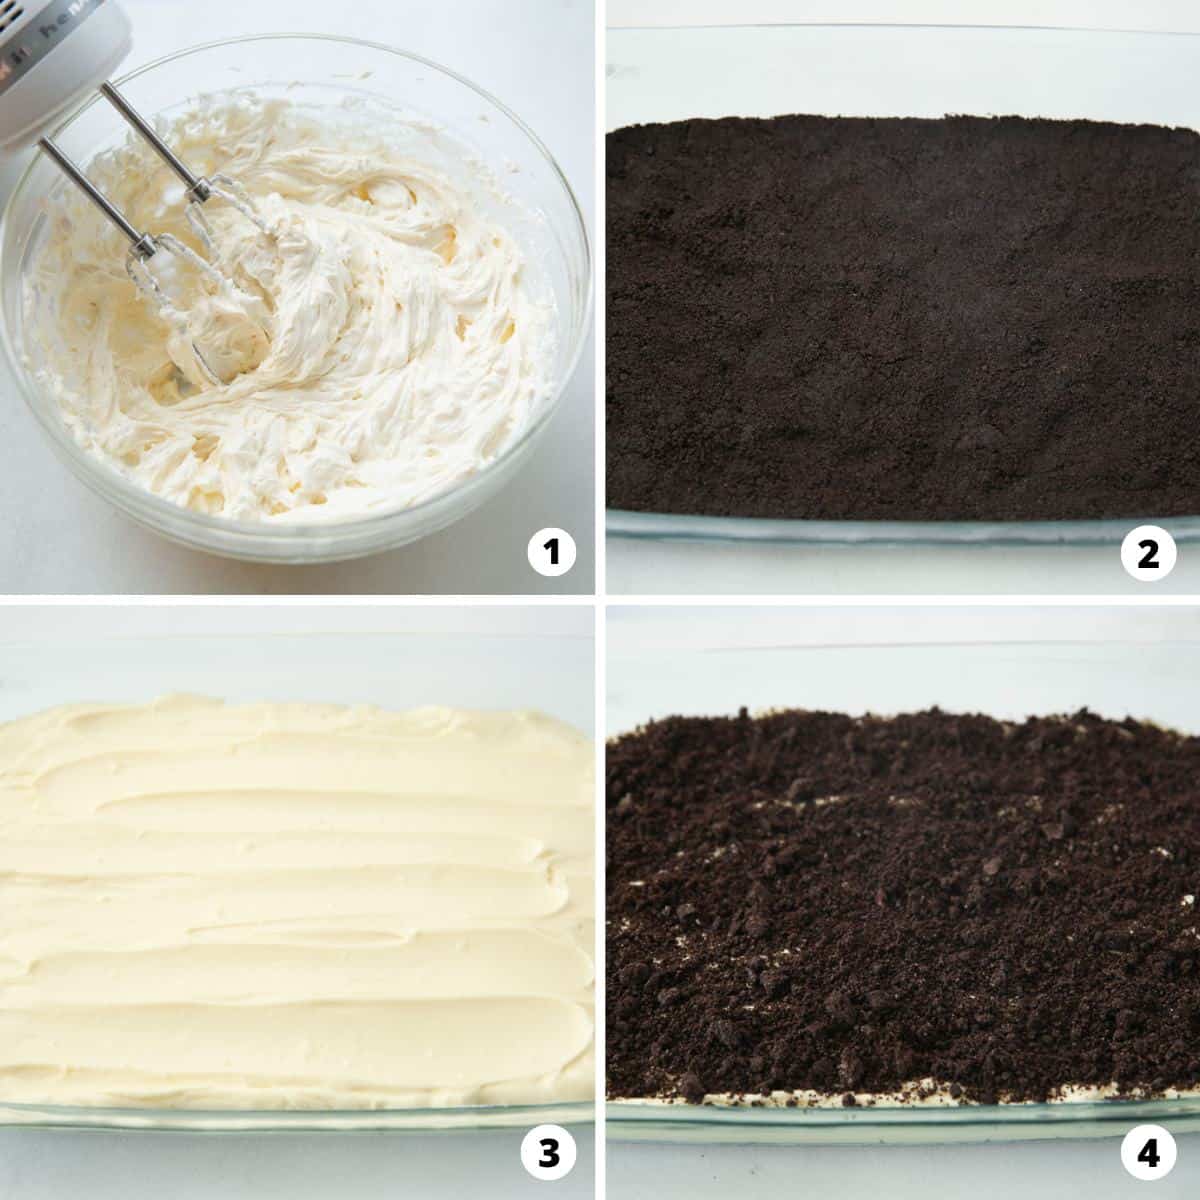 Showing how to make oreo dirt cake in a 4 step collage.